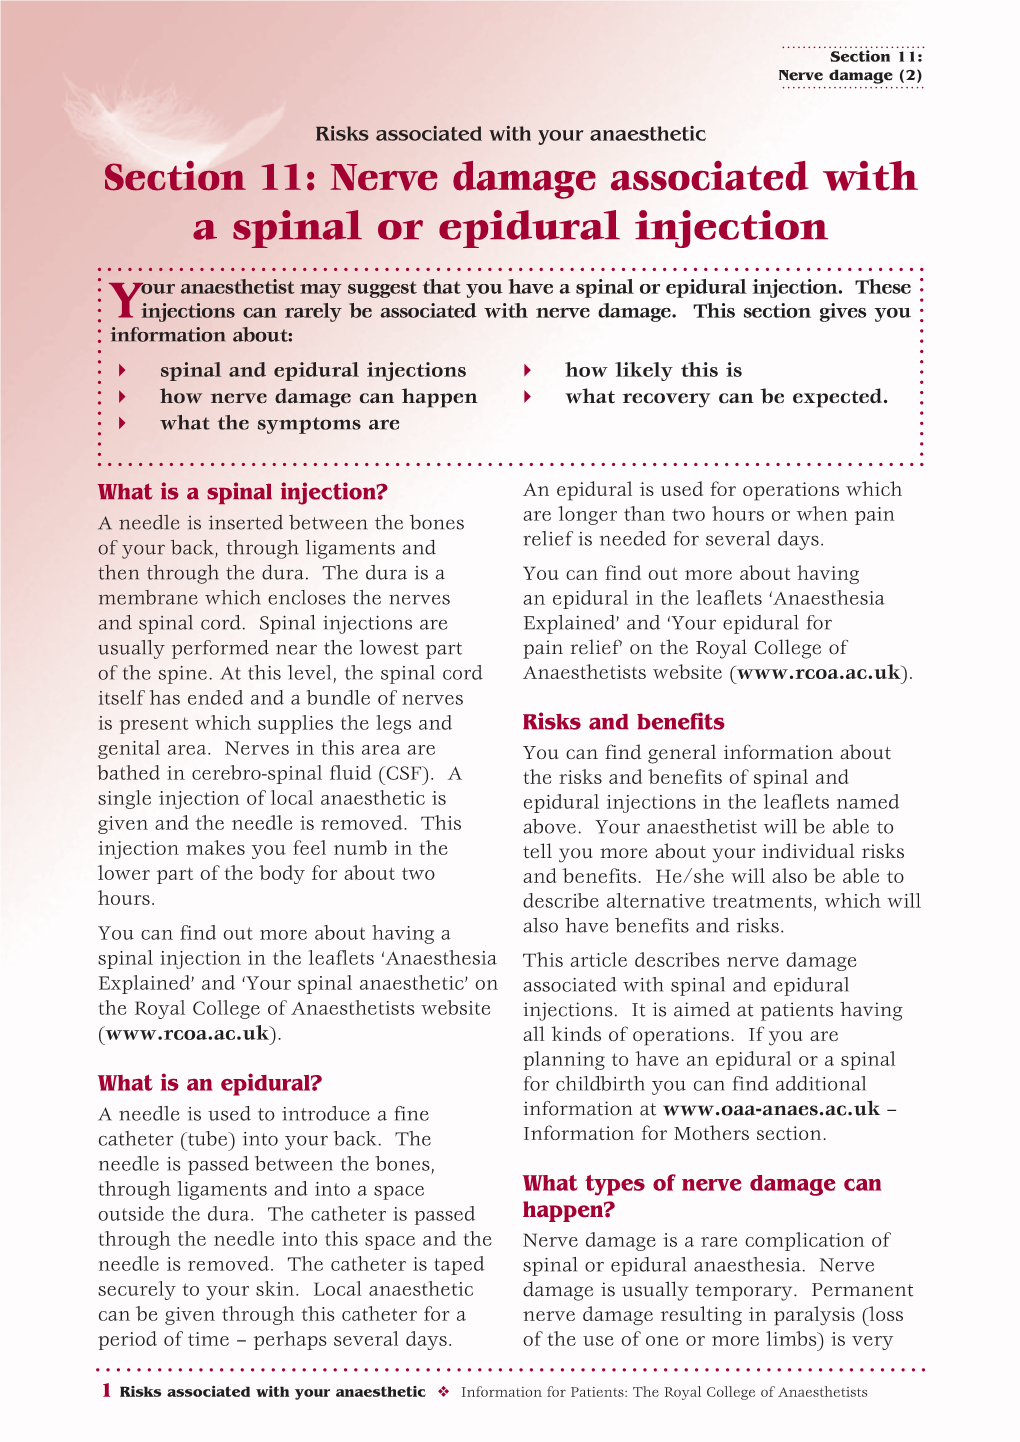 Nerve Damage Associated with a Spinal Or Epidural Injection